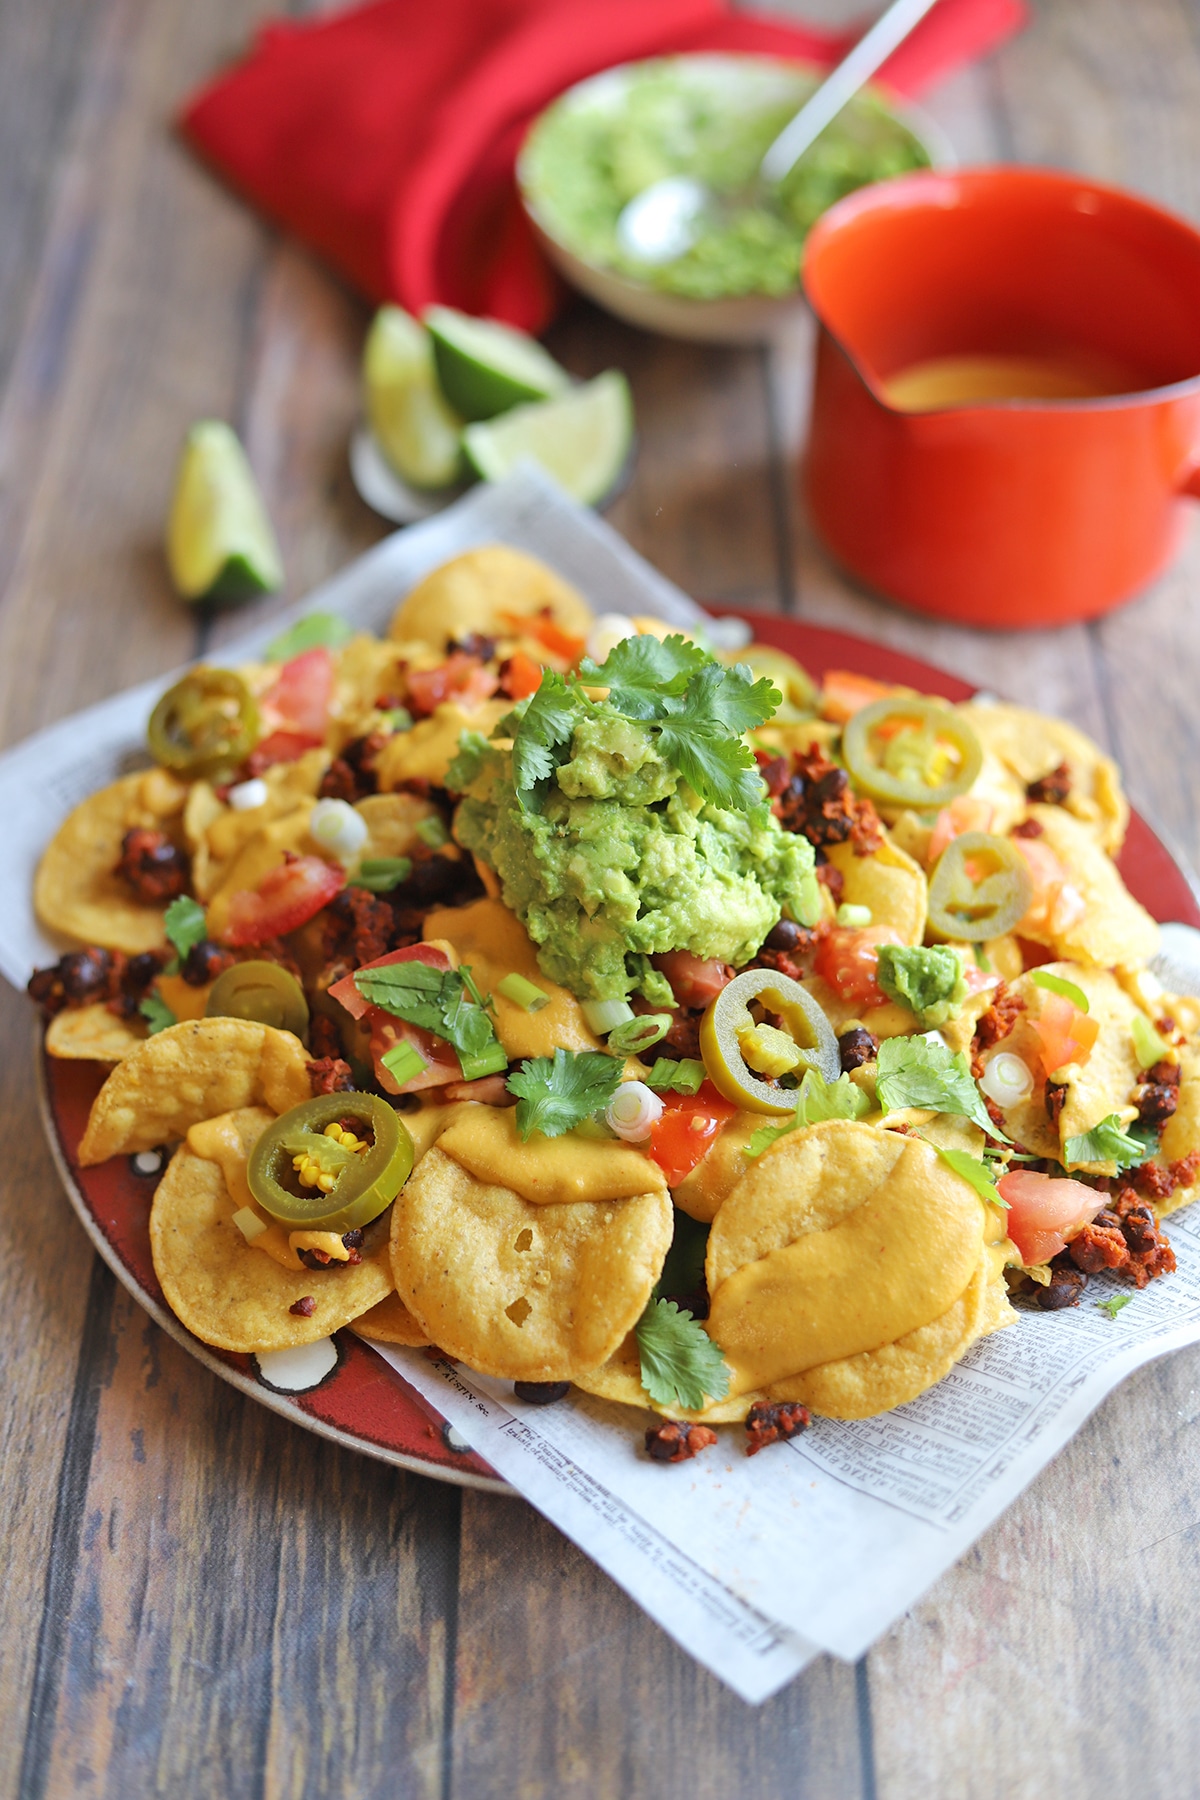 Platter of nachos by cashew queso.